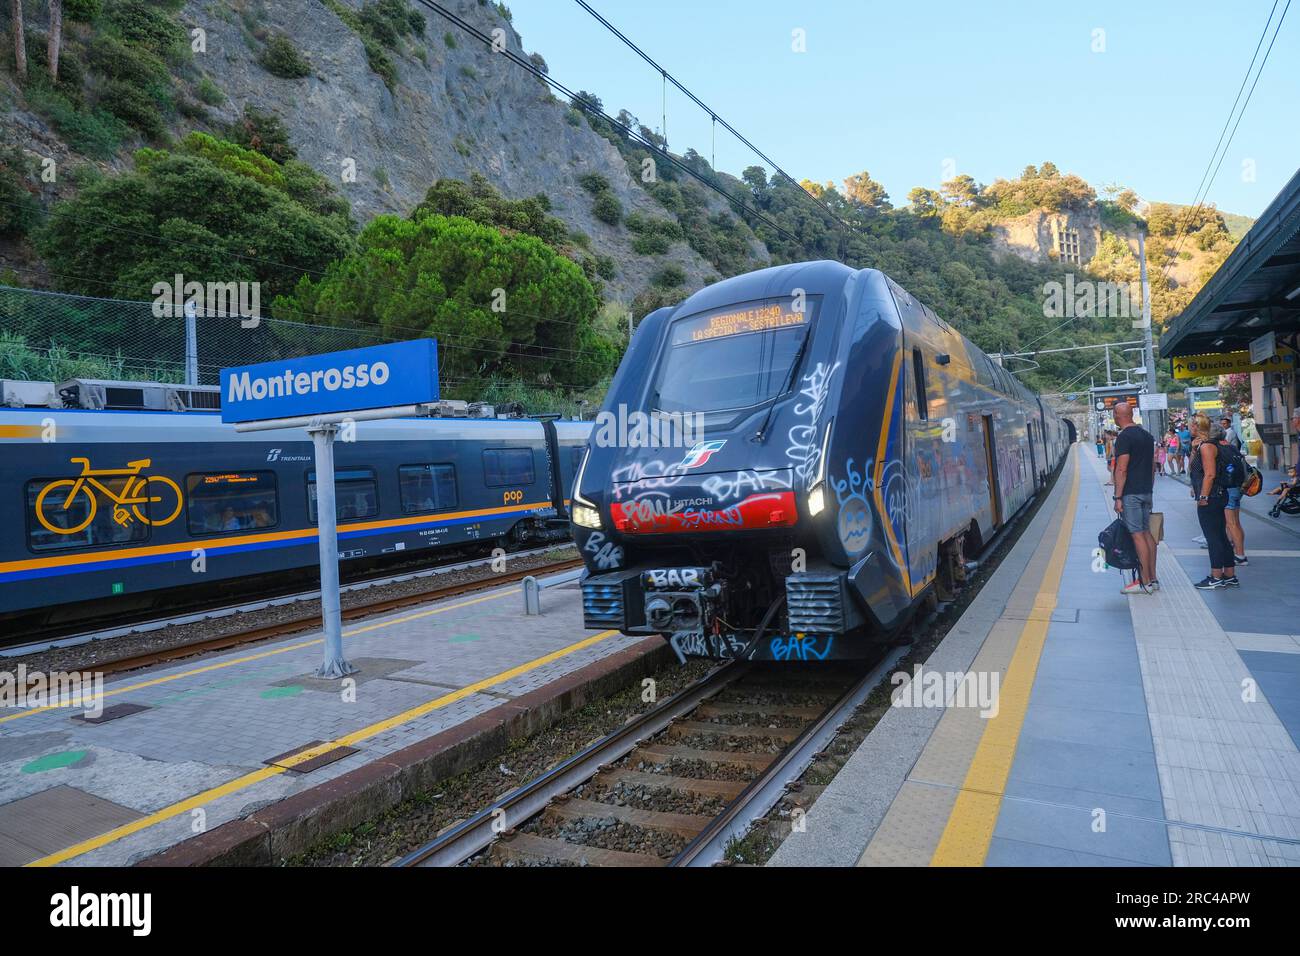 June 2023 Monterosso, Italy: regional train coming to the station in Monterosso across passengers and mountains landscape. Stock Photo